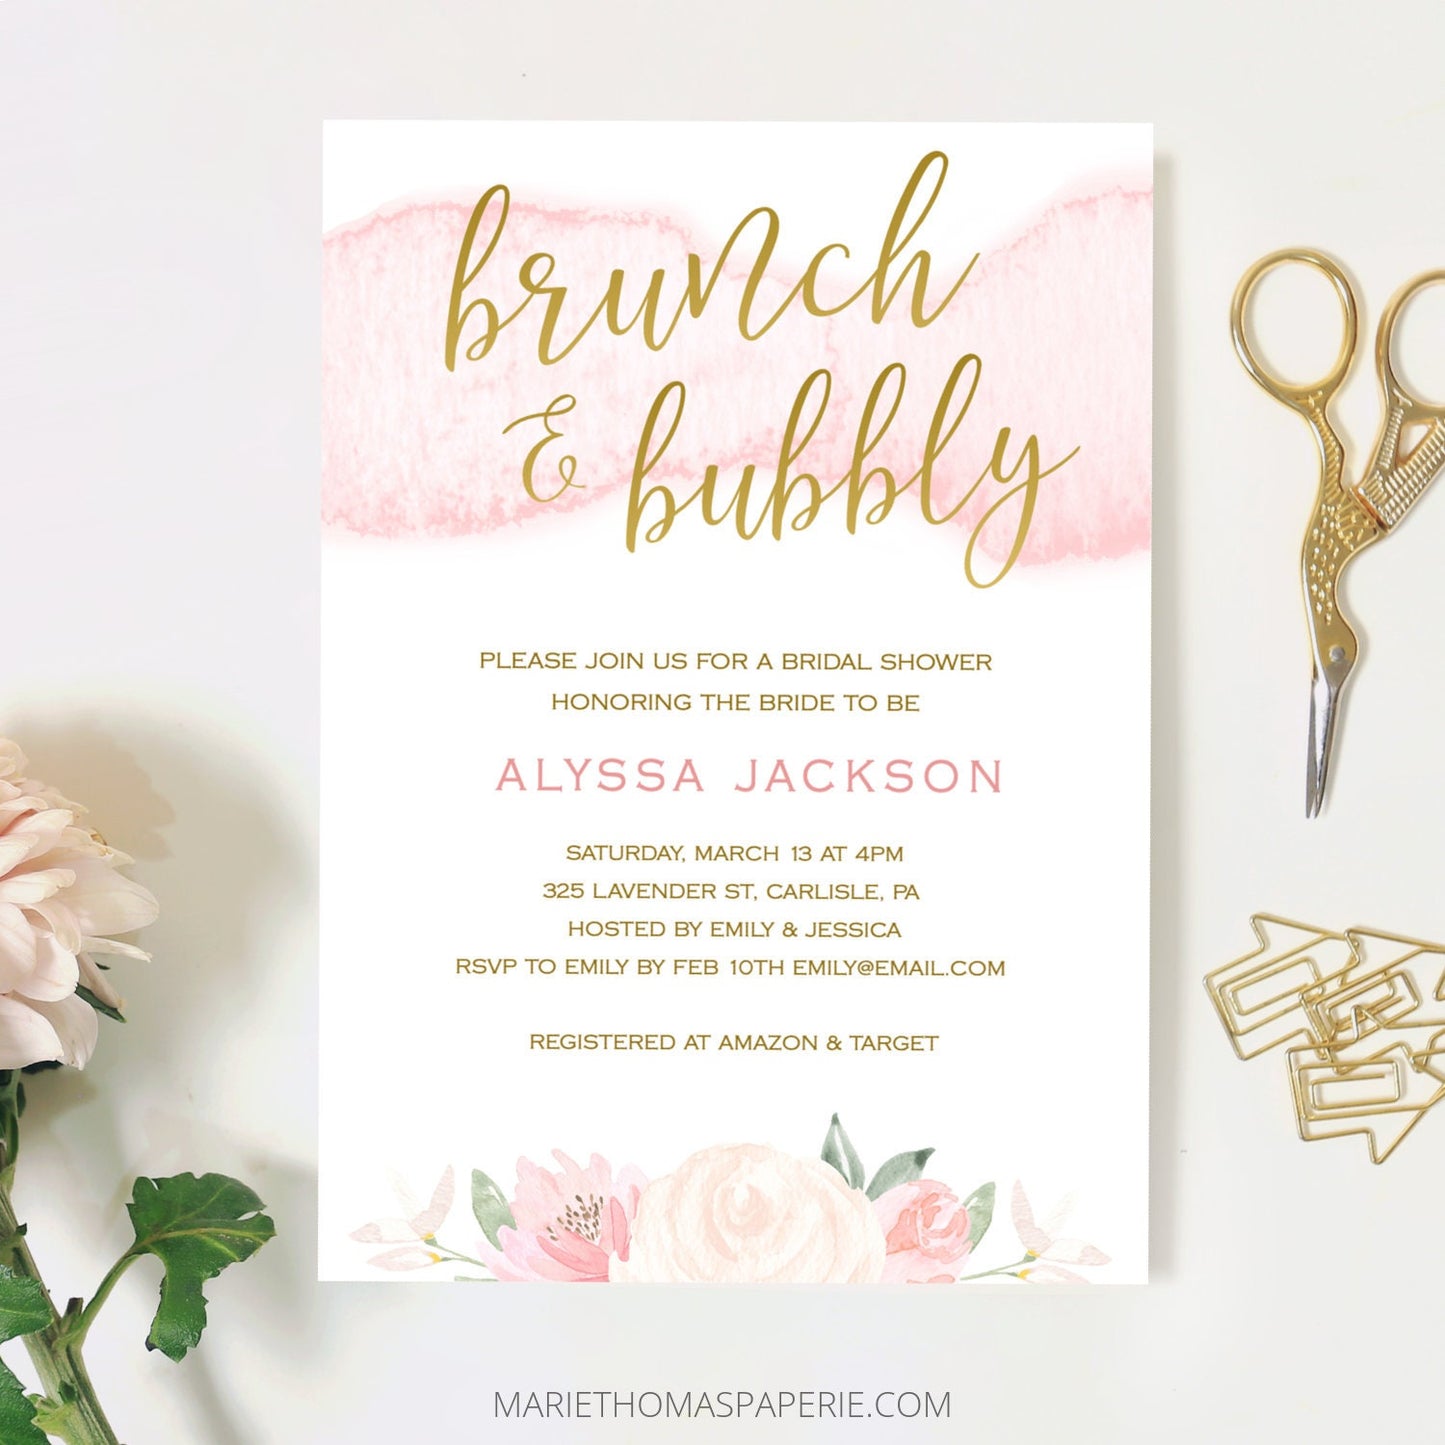 Editable Brunch and Bubbly Bridal Shower Invitation Blush Pink & Gold Watercolor Bridal Shower Invite Template